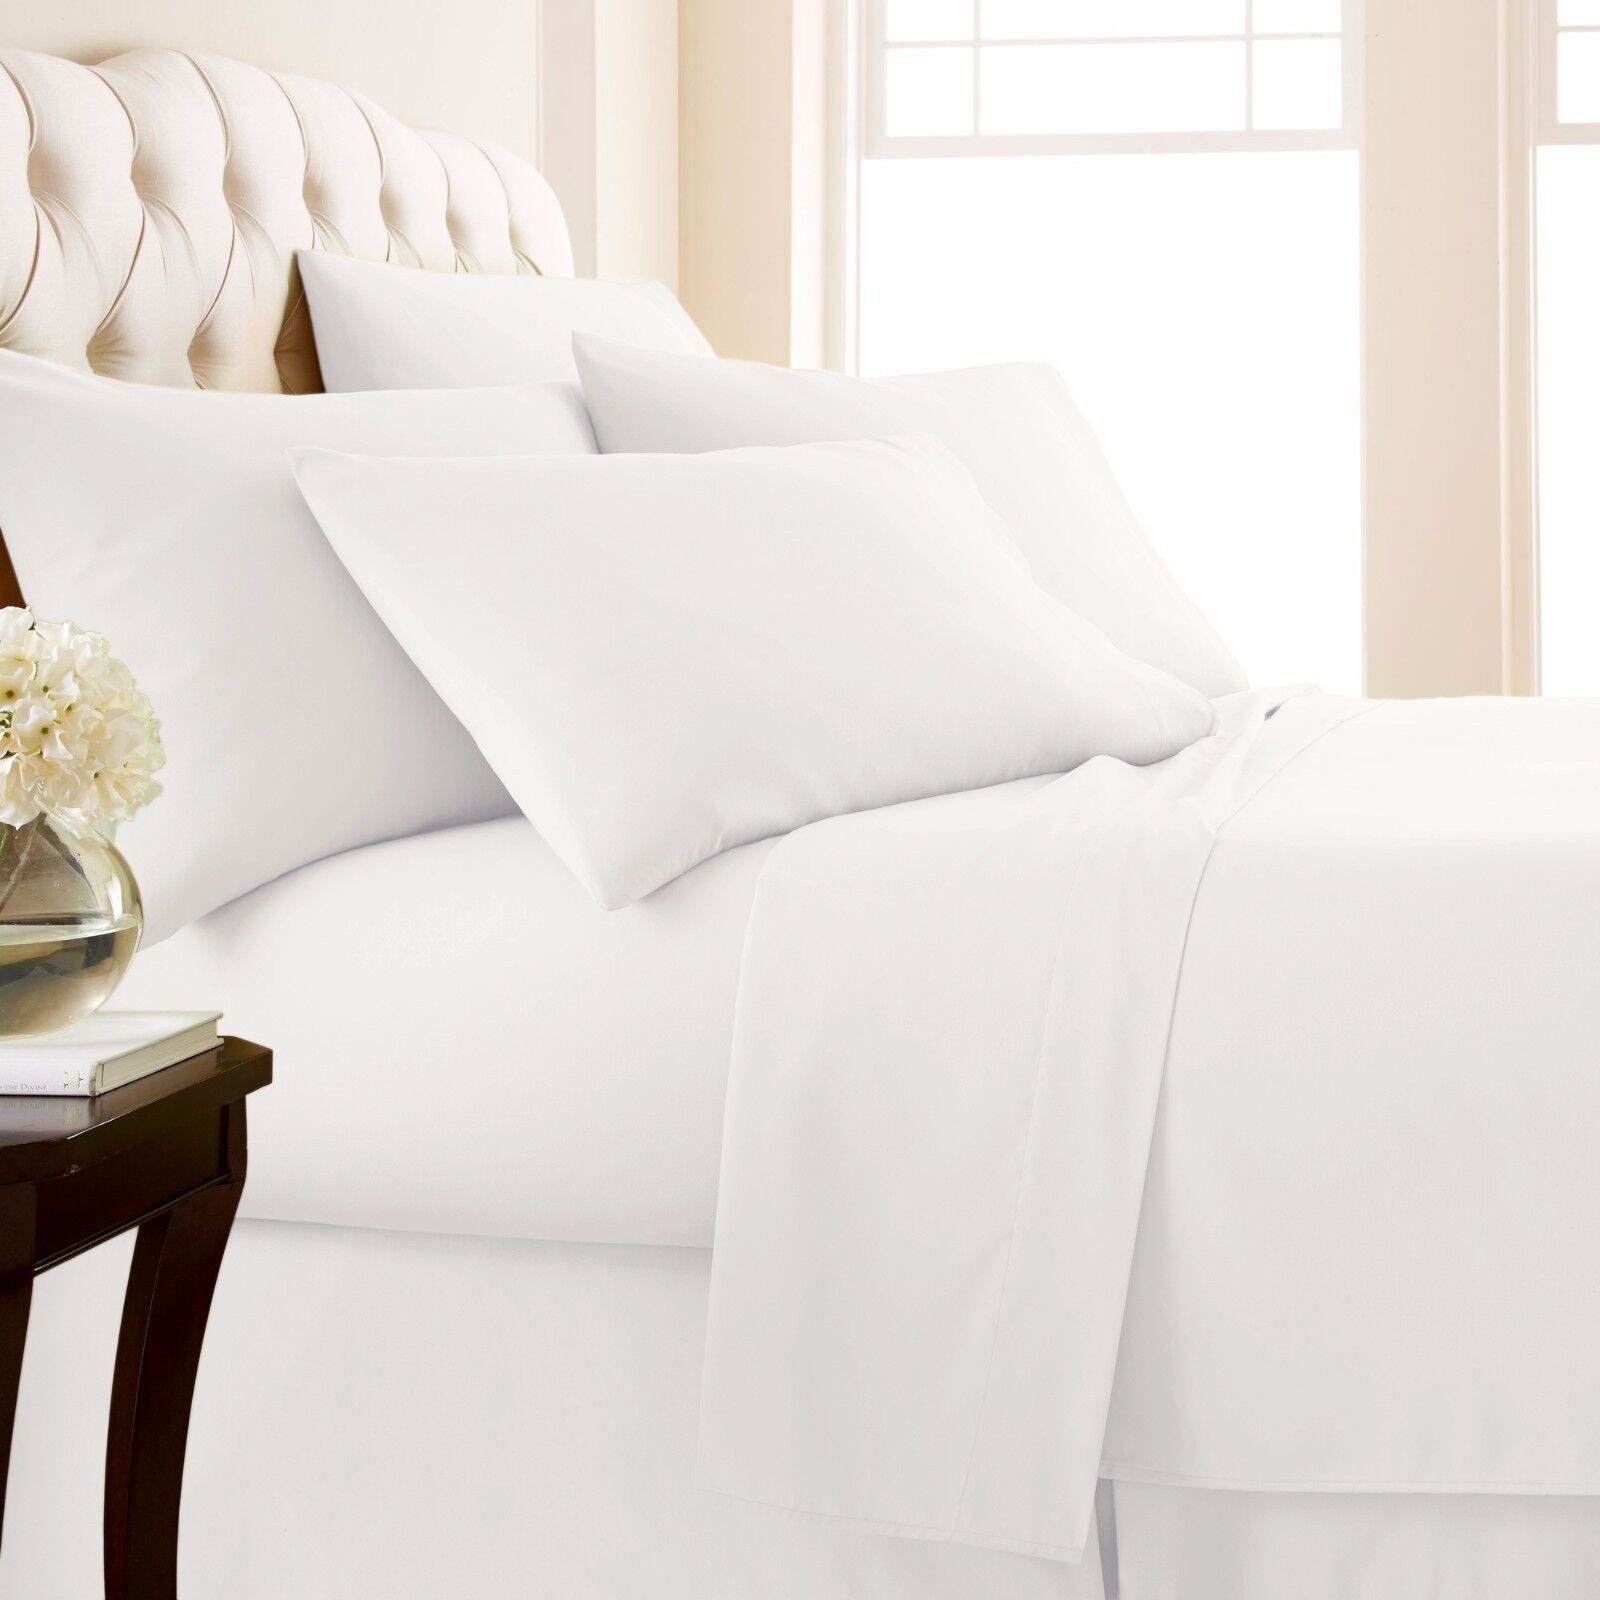 4-Piece: Luxury Home 1000 Thread Count Egyptian Cotton Sheet Sets